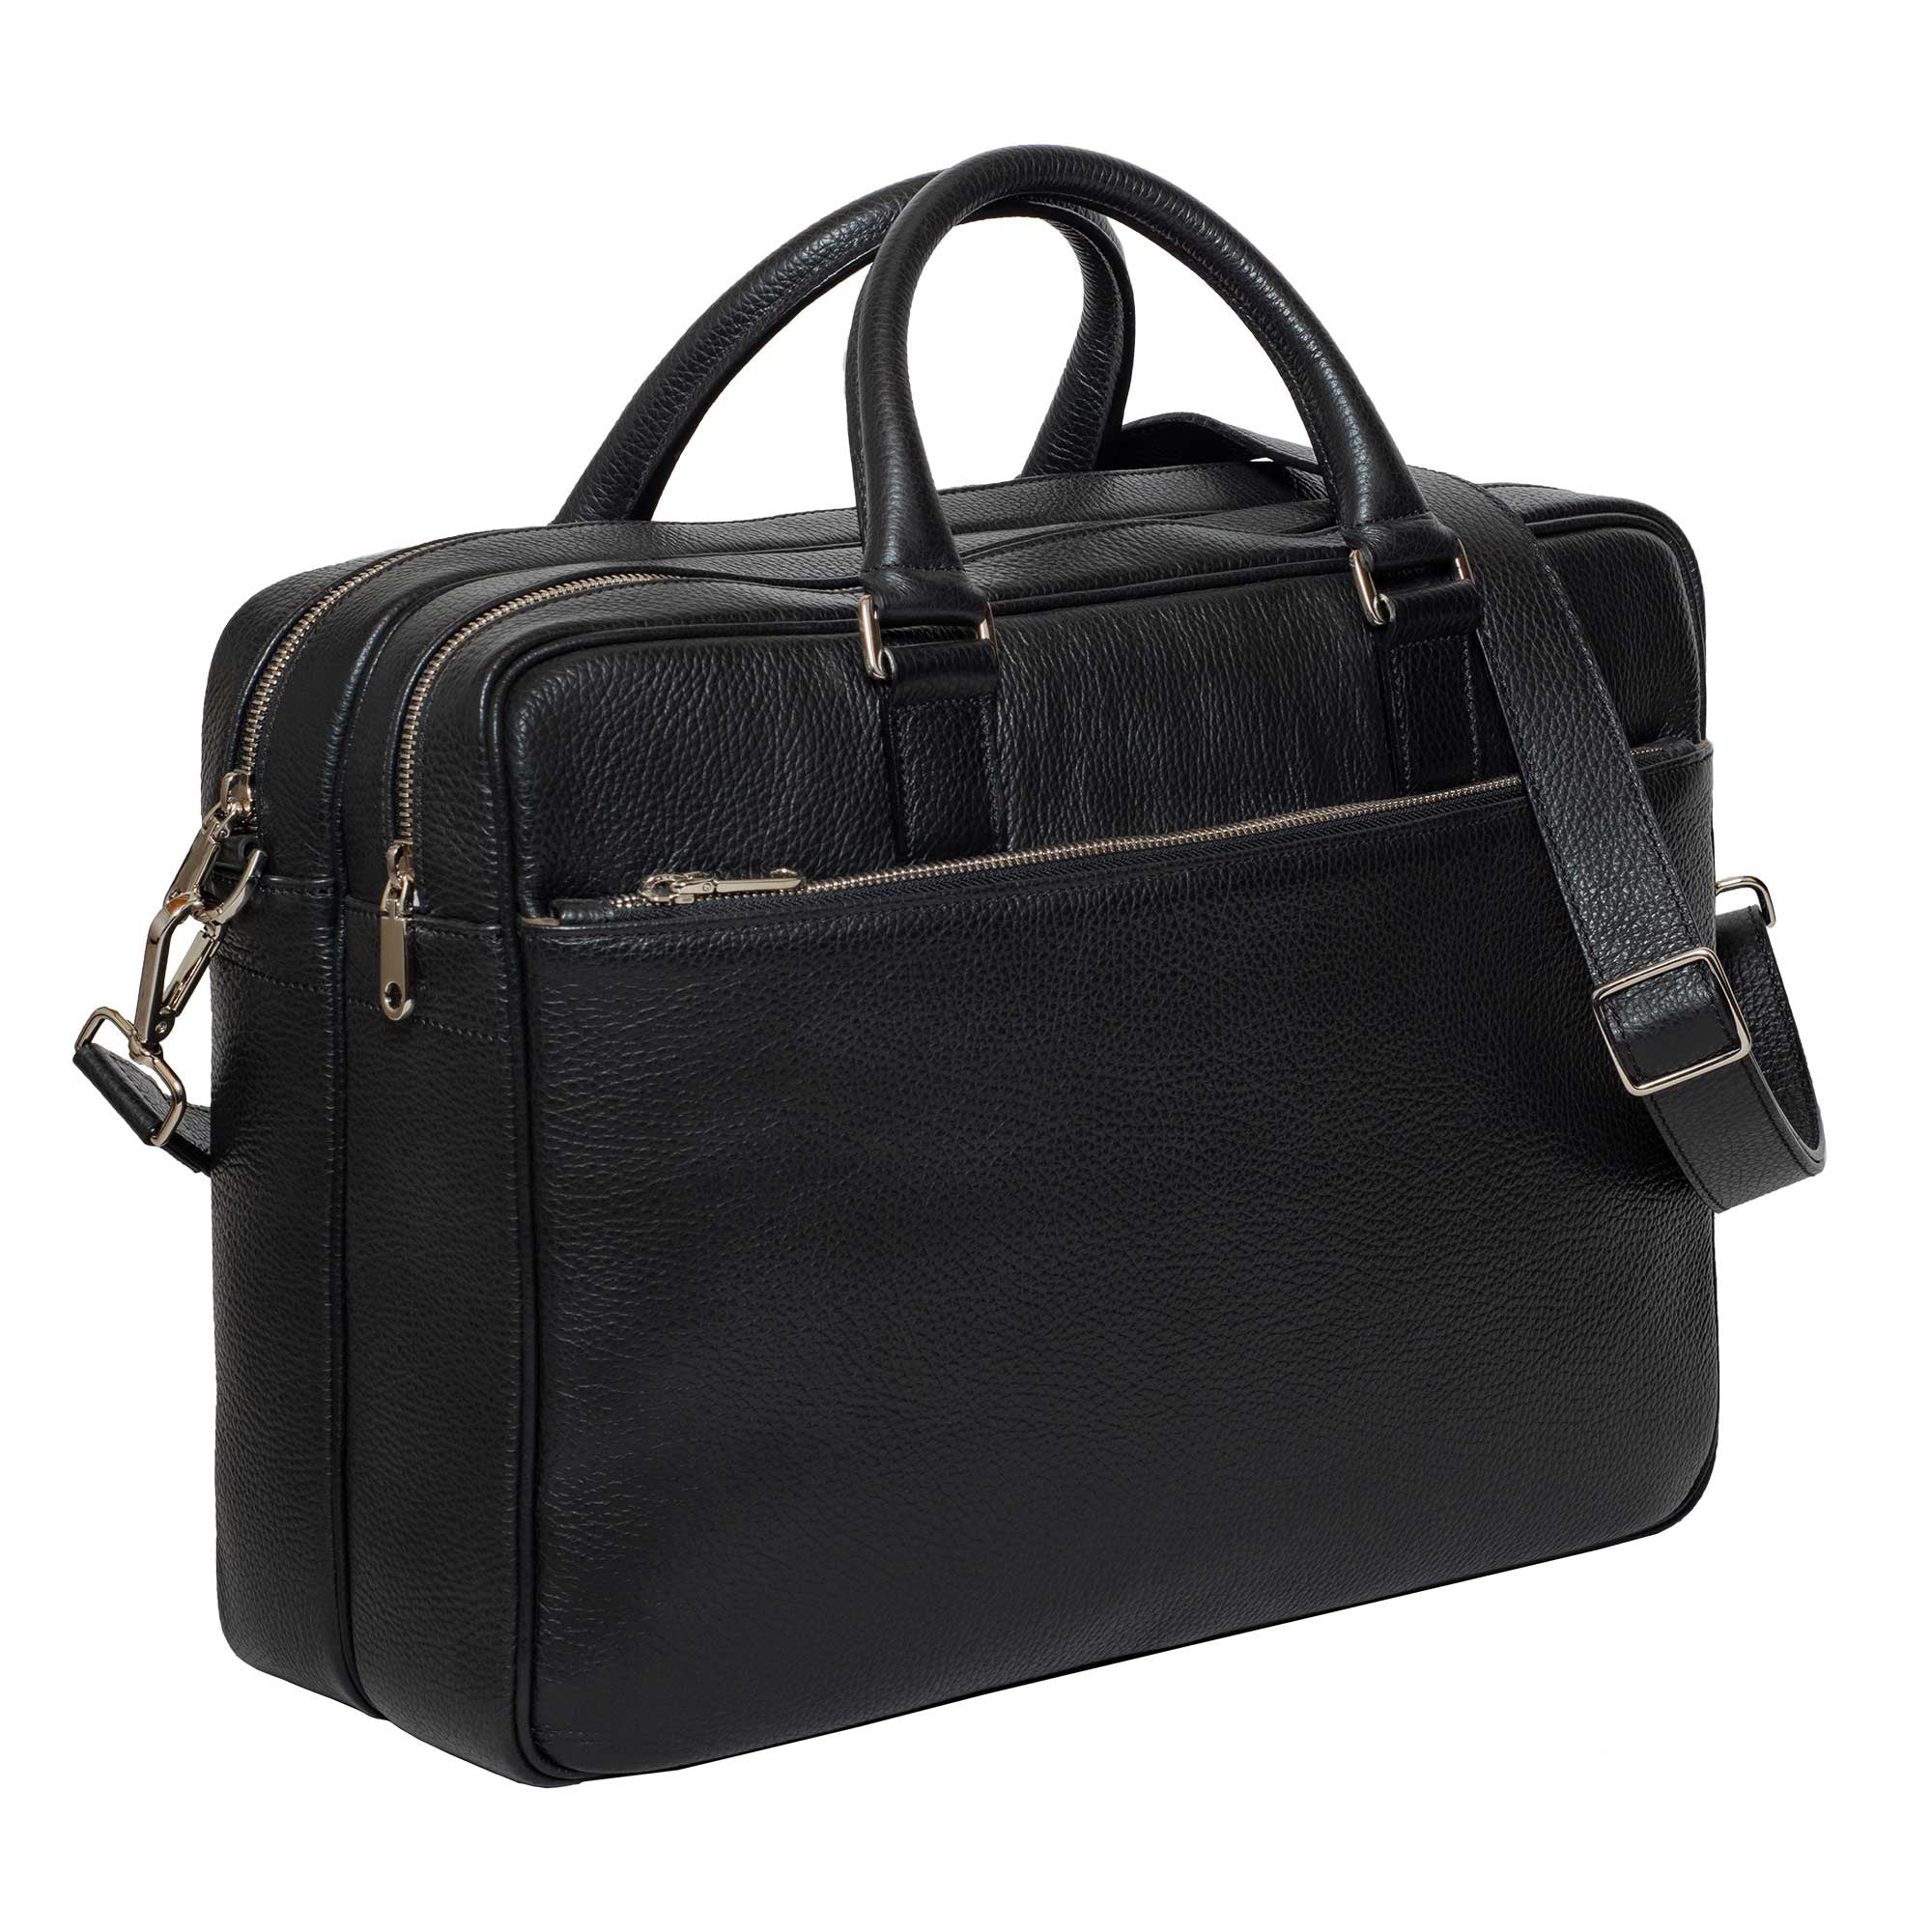 DiLoro Italian Leather Briefcases for Men | Made in Italy - Front, Side View with Strap